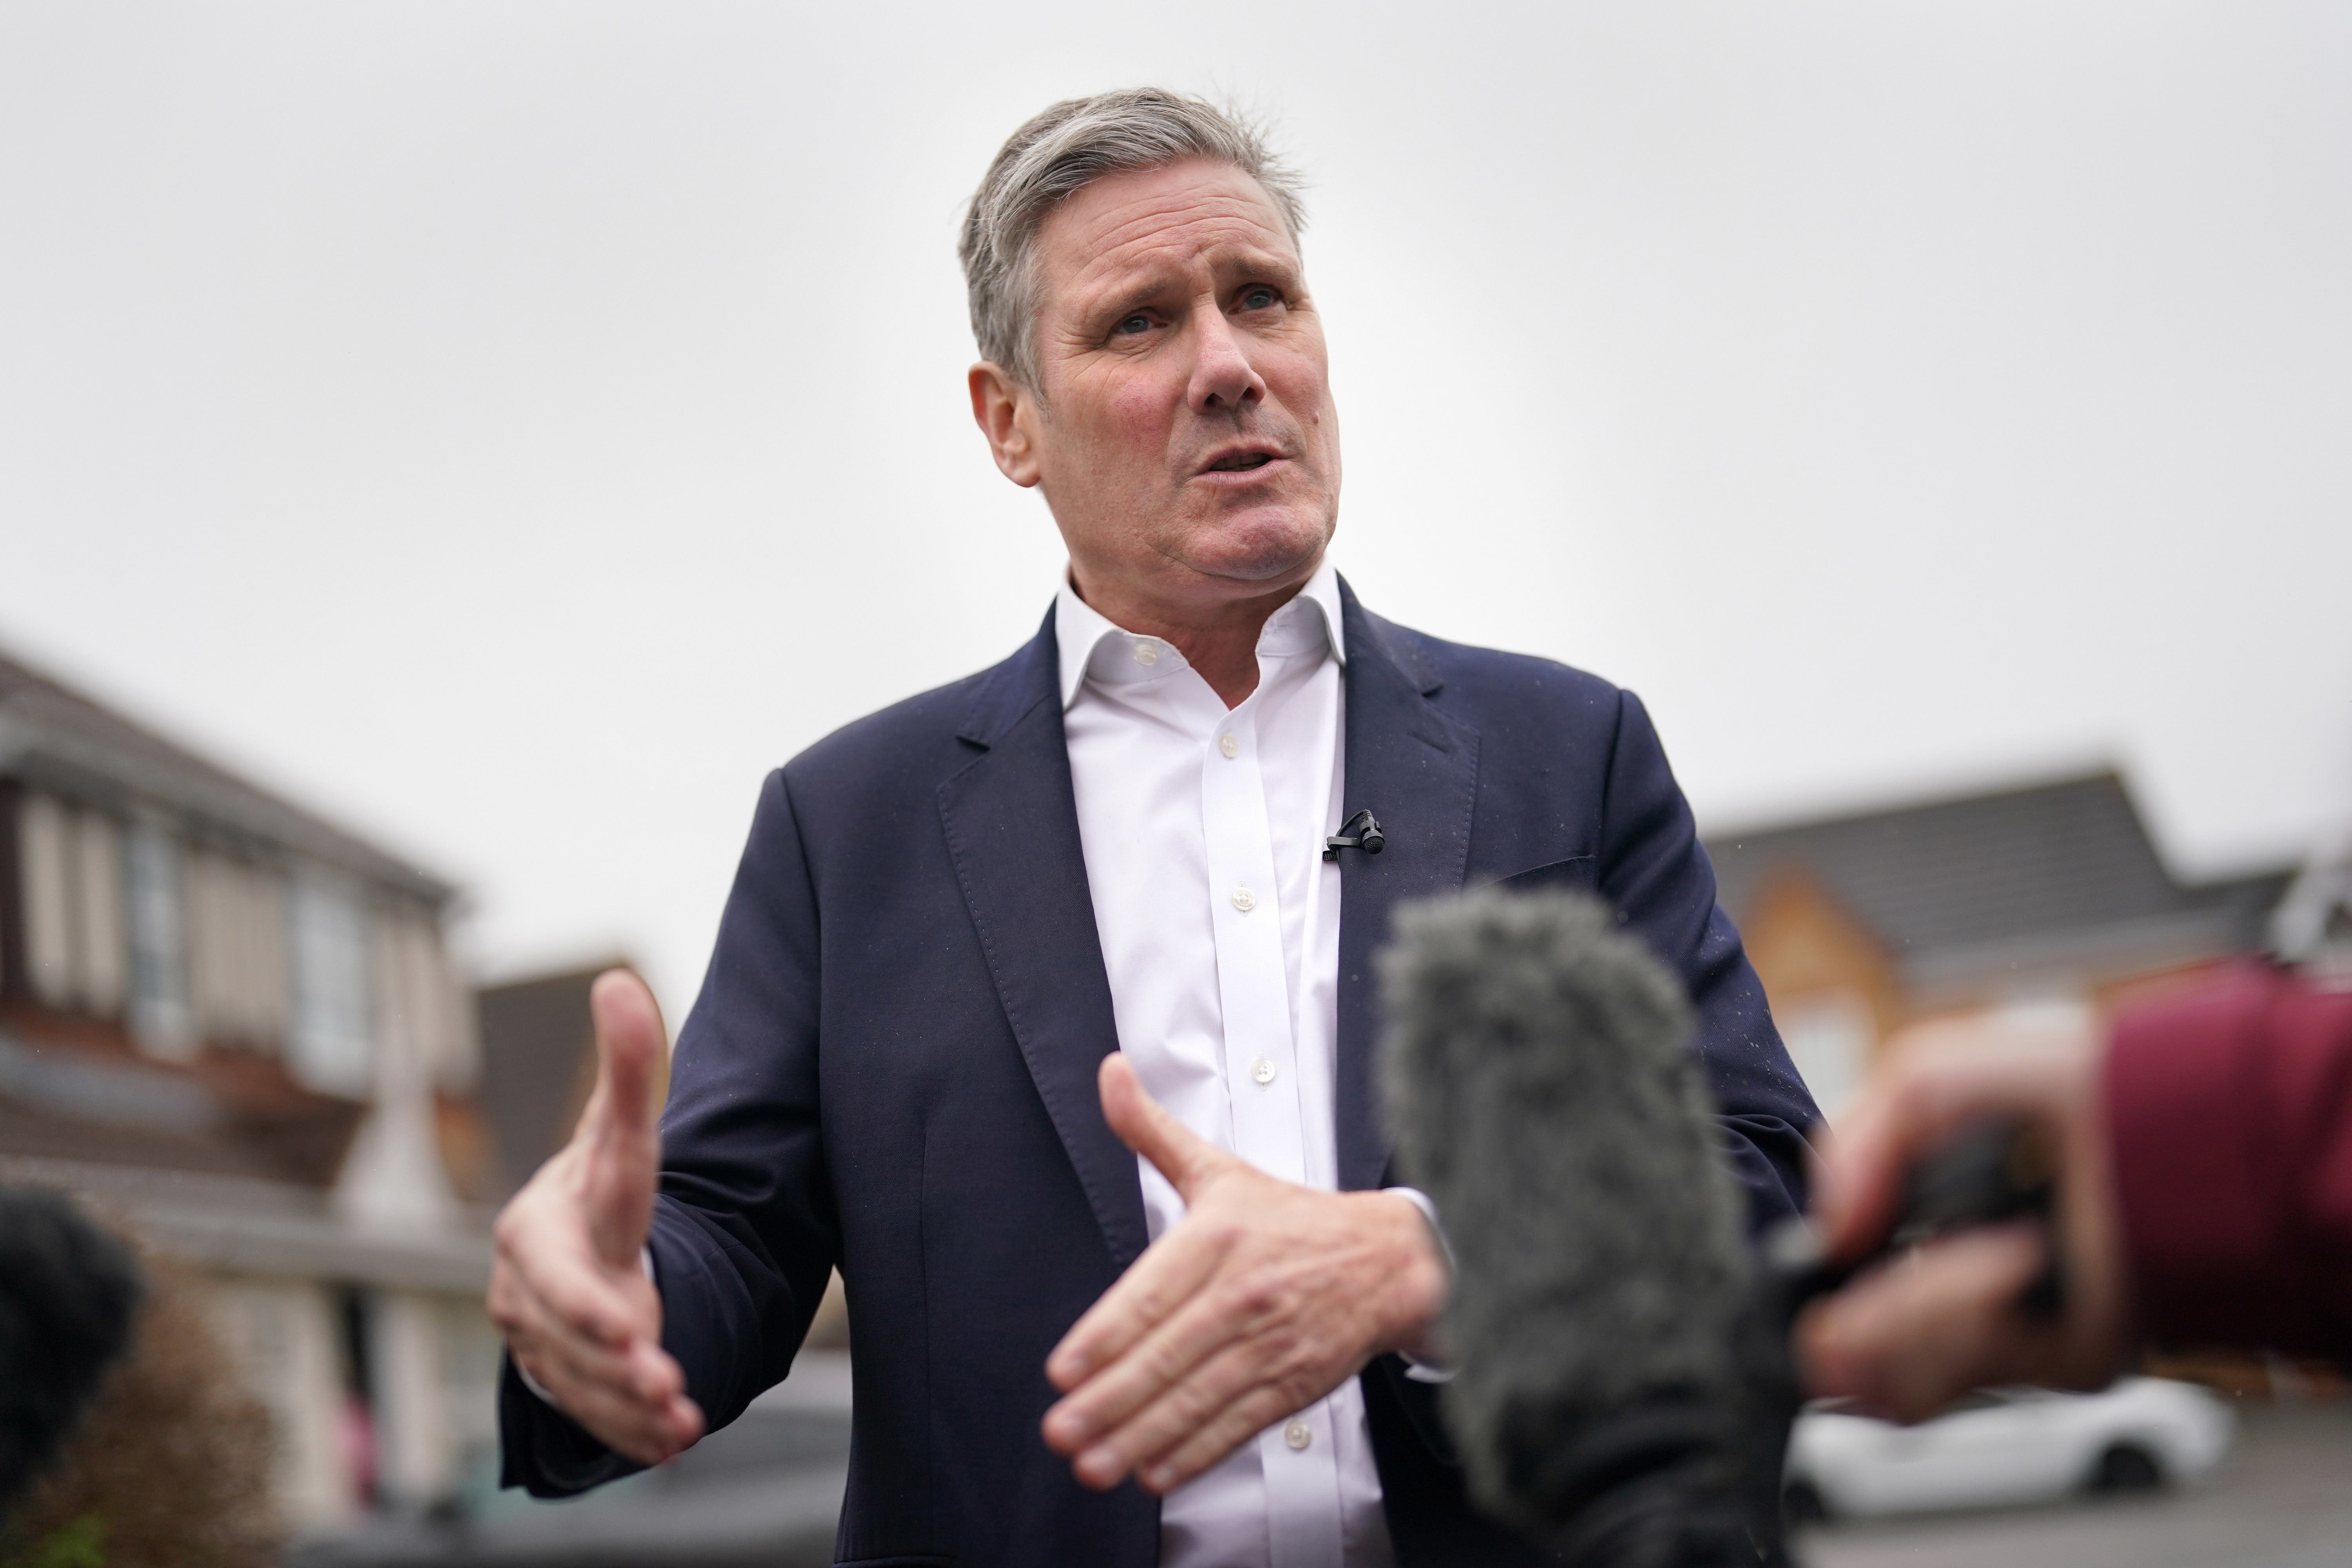 Keir Starmer is under pressure from some advisers to ensure some quick wins on popular policies